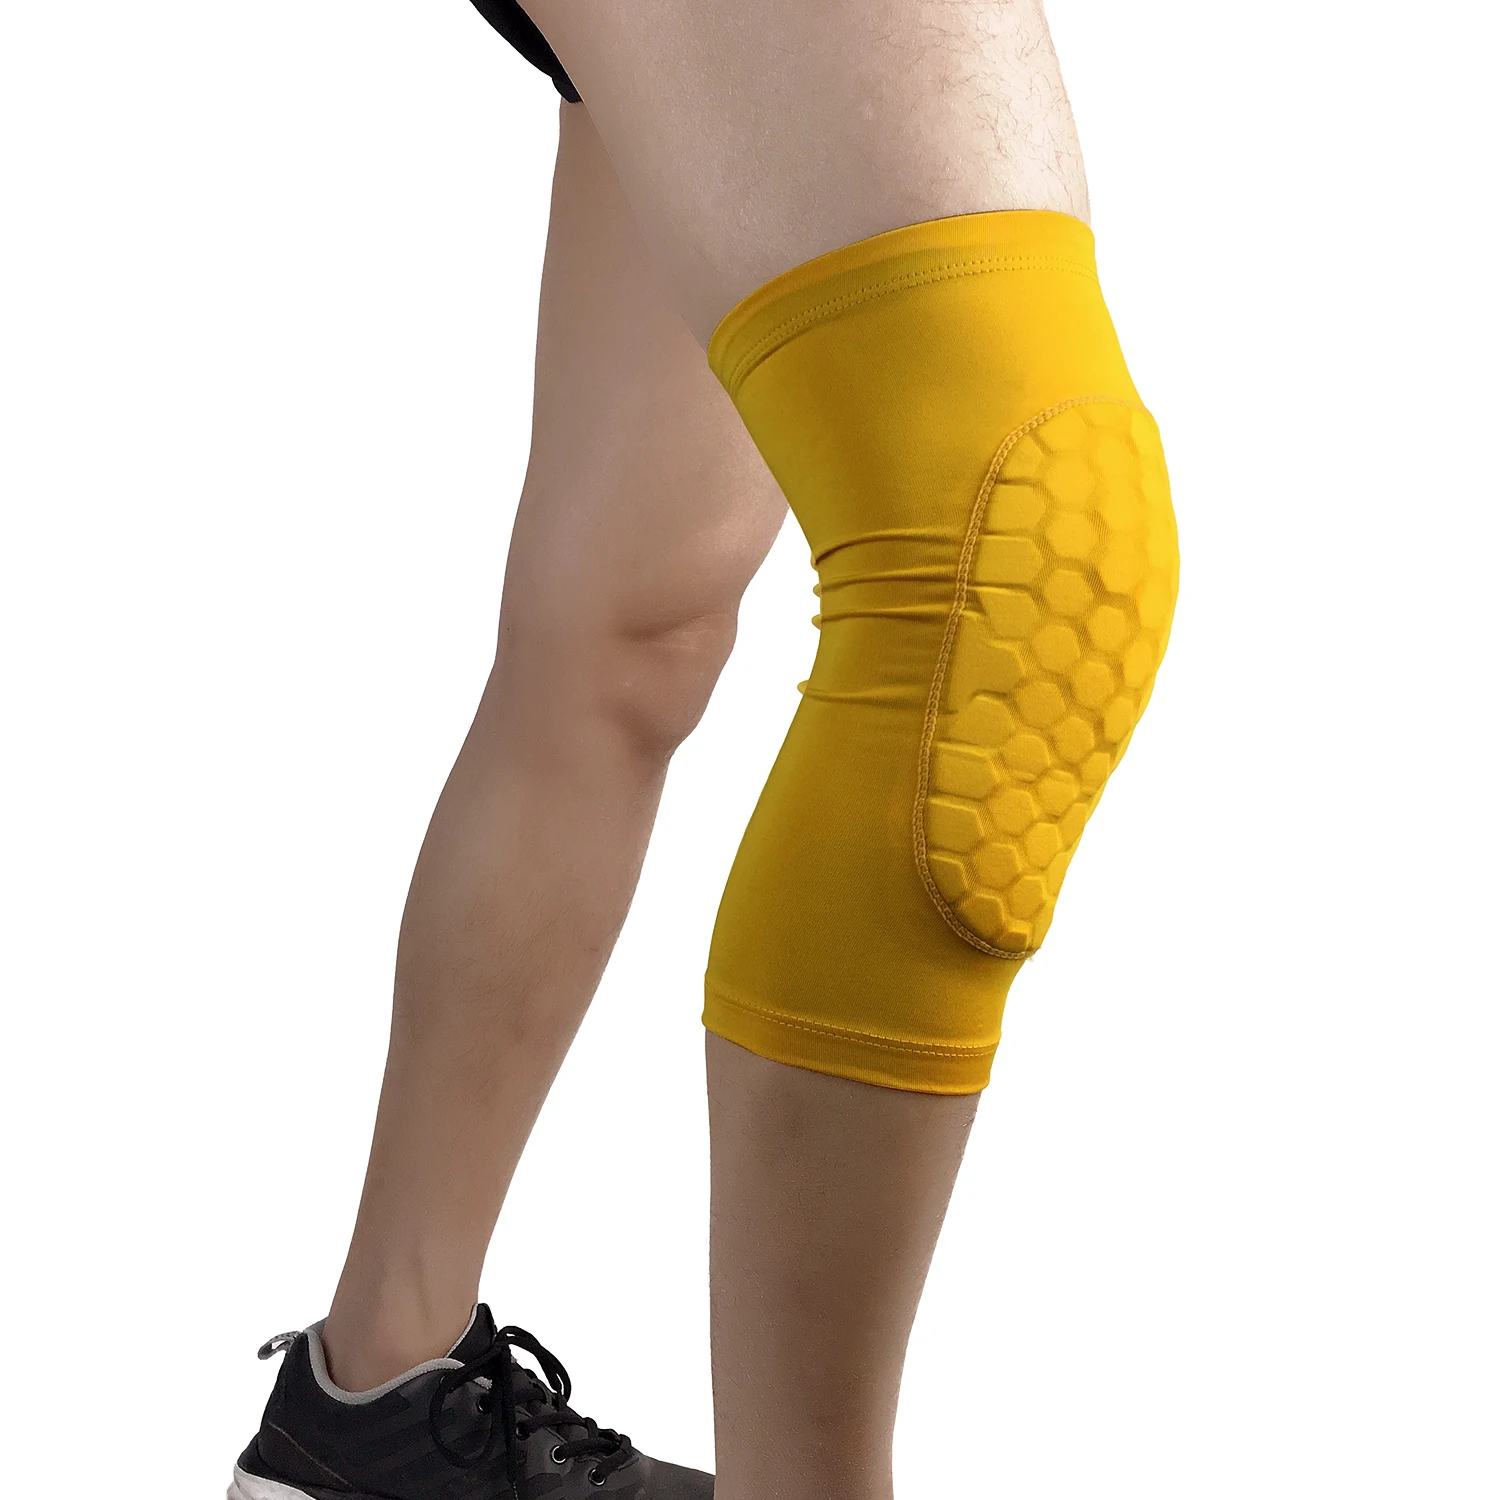 

Wholesale Joint Support Non-Slip Knee Pads Powerful Rebound Spring Force Power lift Knee Support Brace Sleeves, Black ,white, yellow, blue,